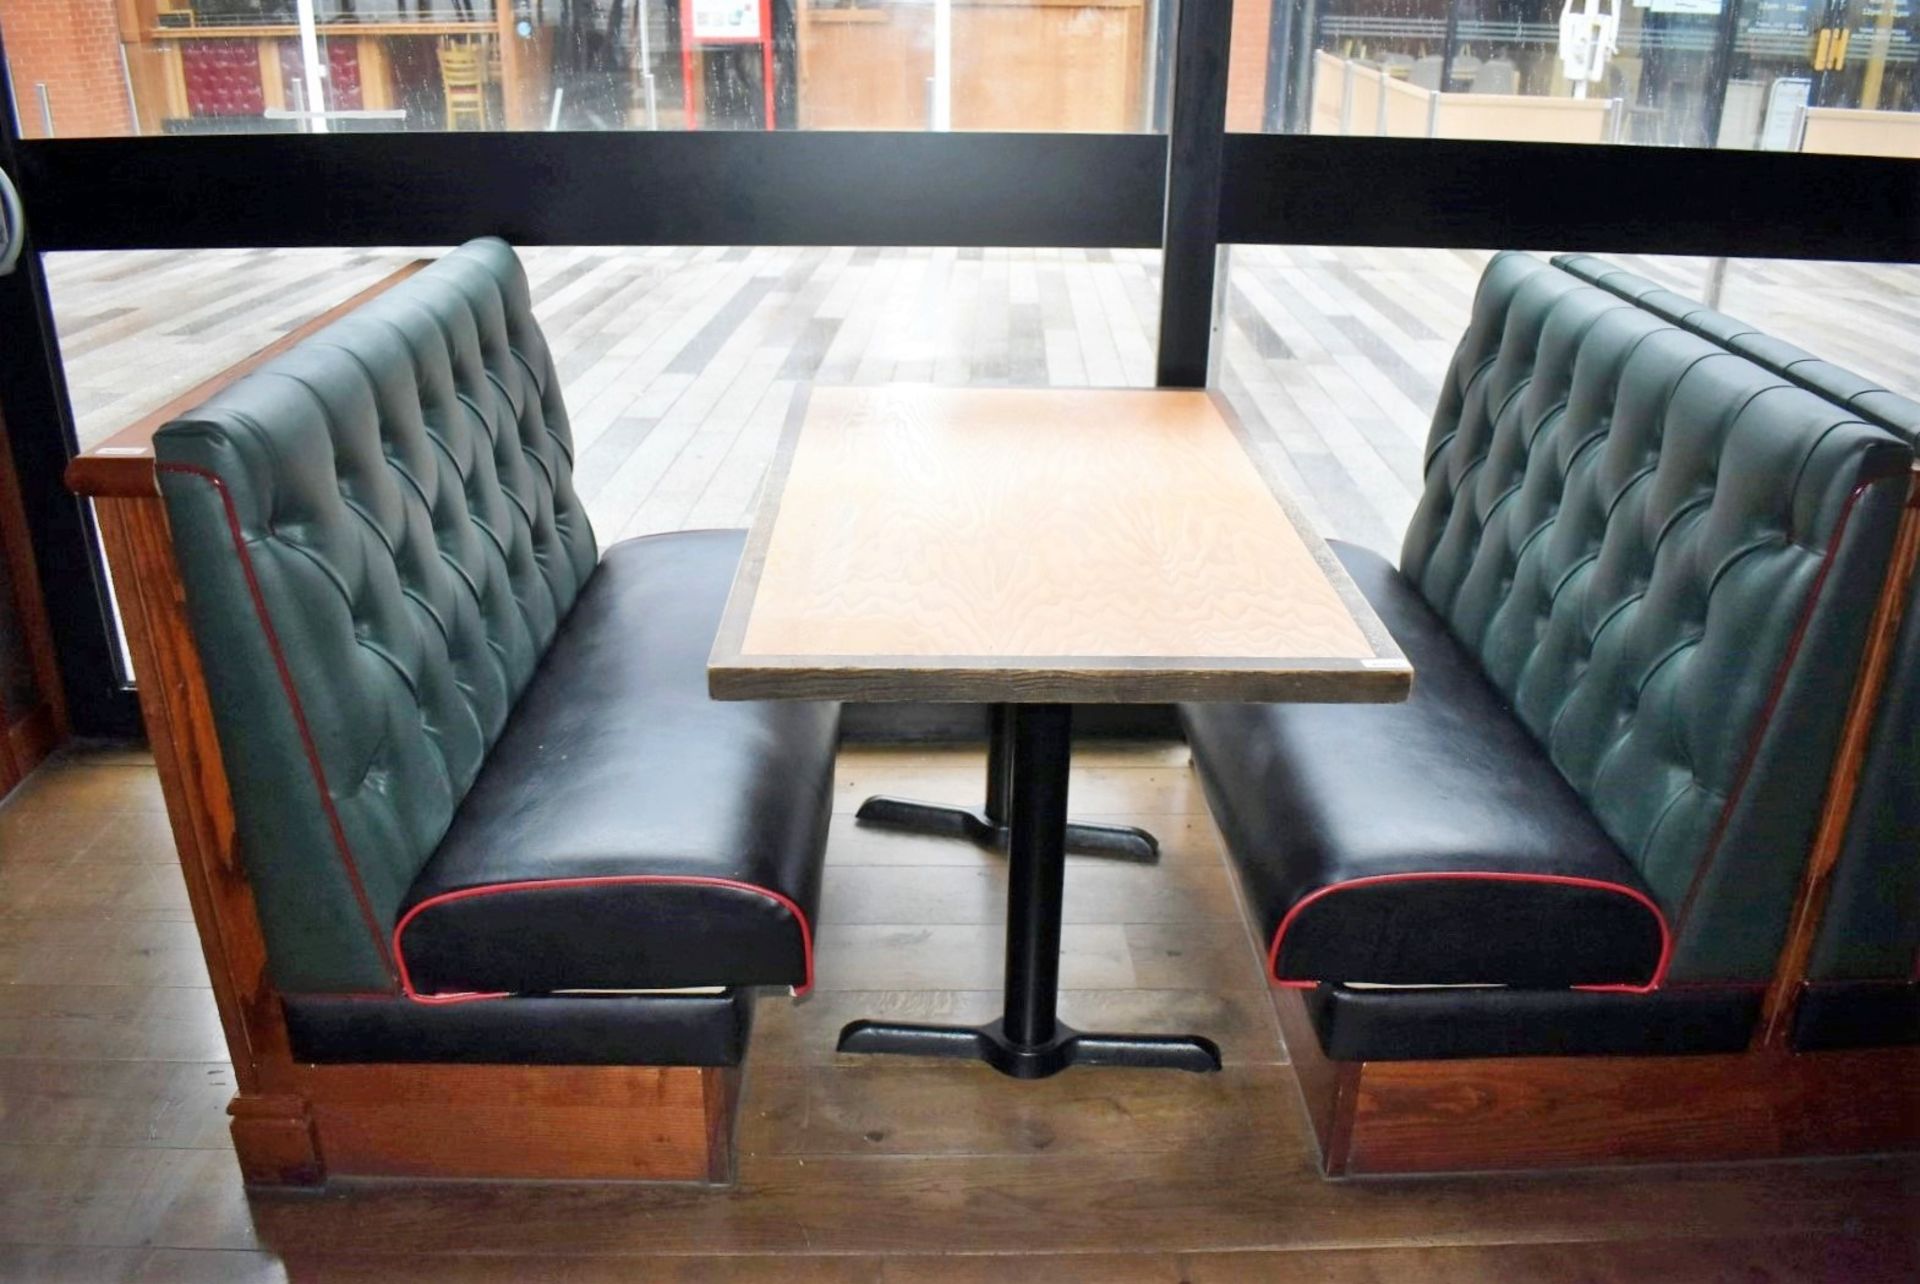 4 x Sections of Restaurant Double Booth Seating - Sits Up to 12 Persons - Green & Black Upholstery - Image 3 of 24